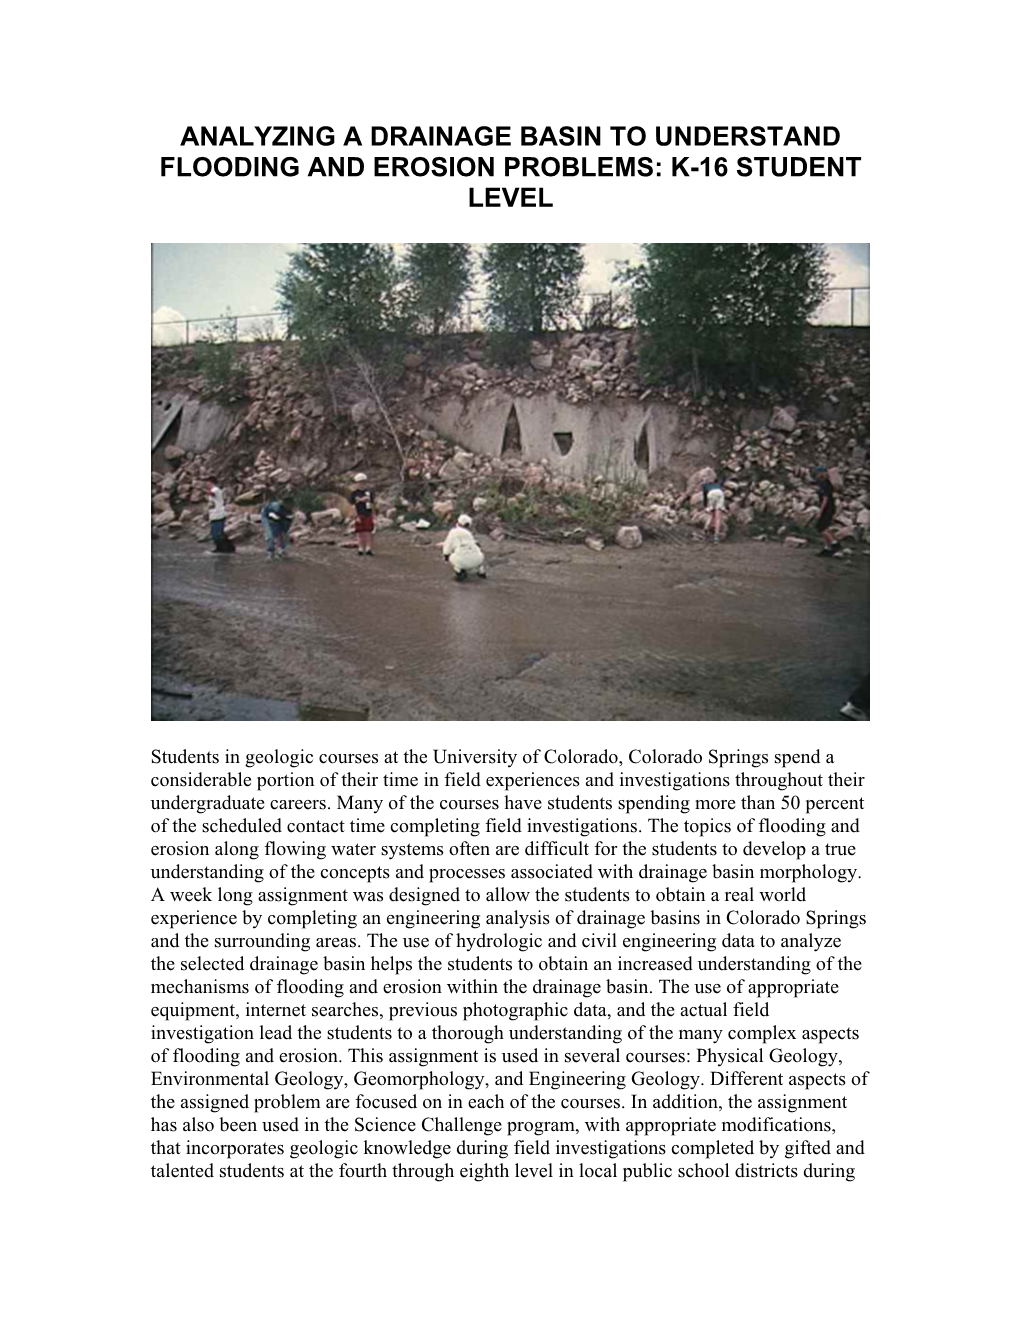 Analizing a Drainage Basin to Understand Flooding And